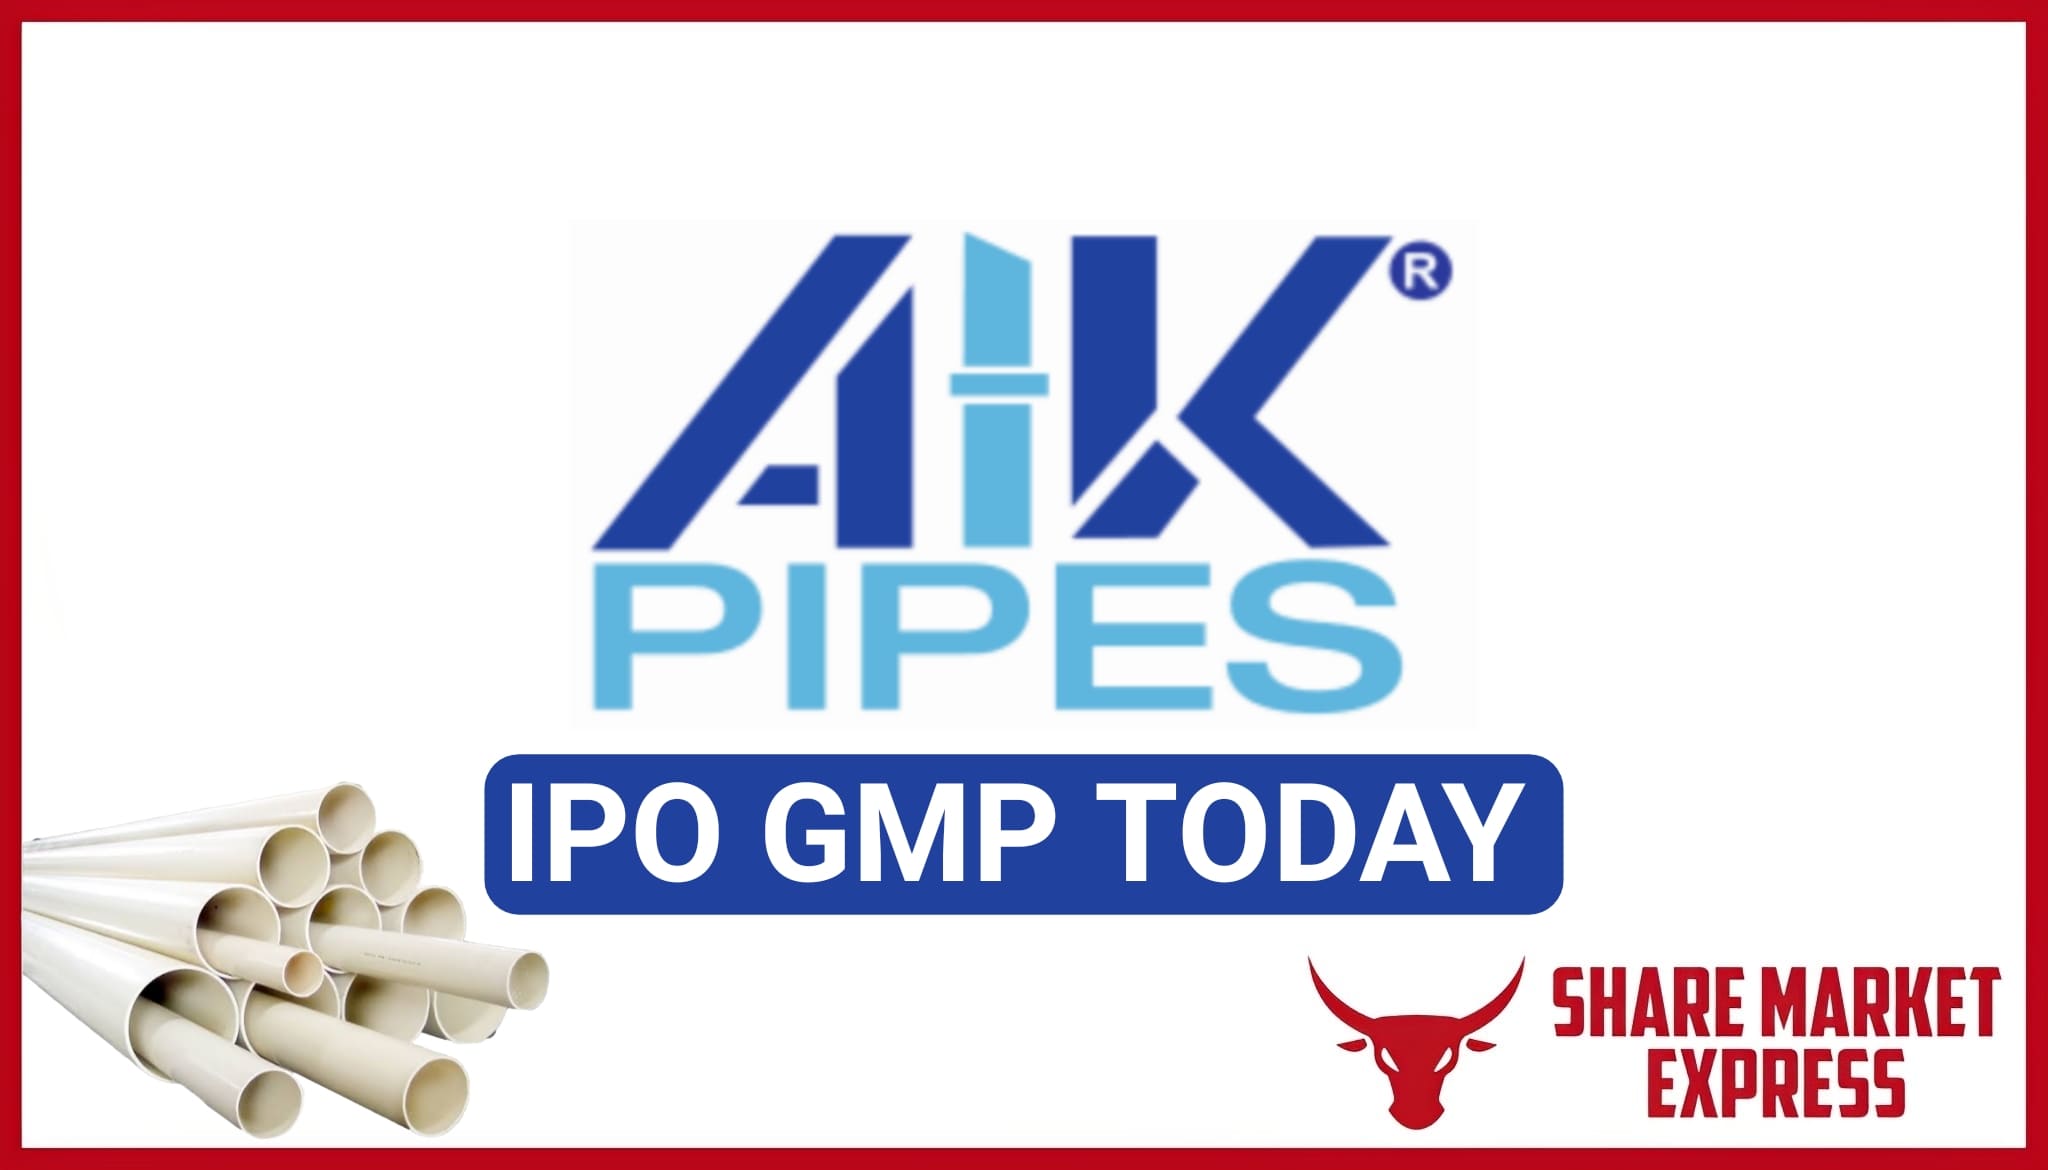 AIK Pipes IPO GMP Today